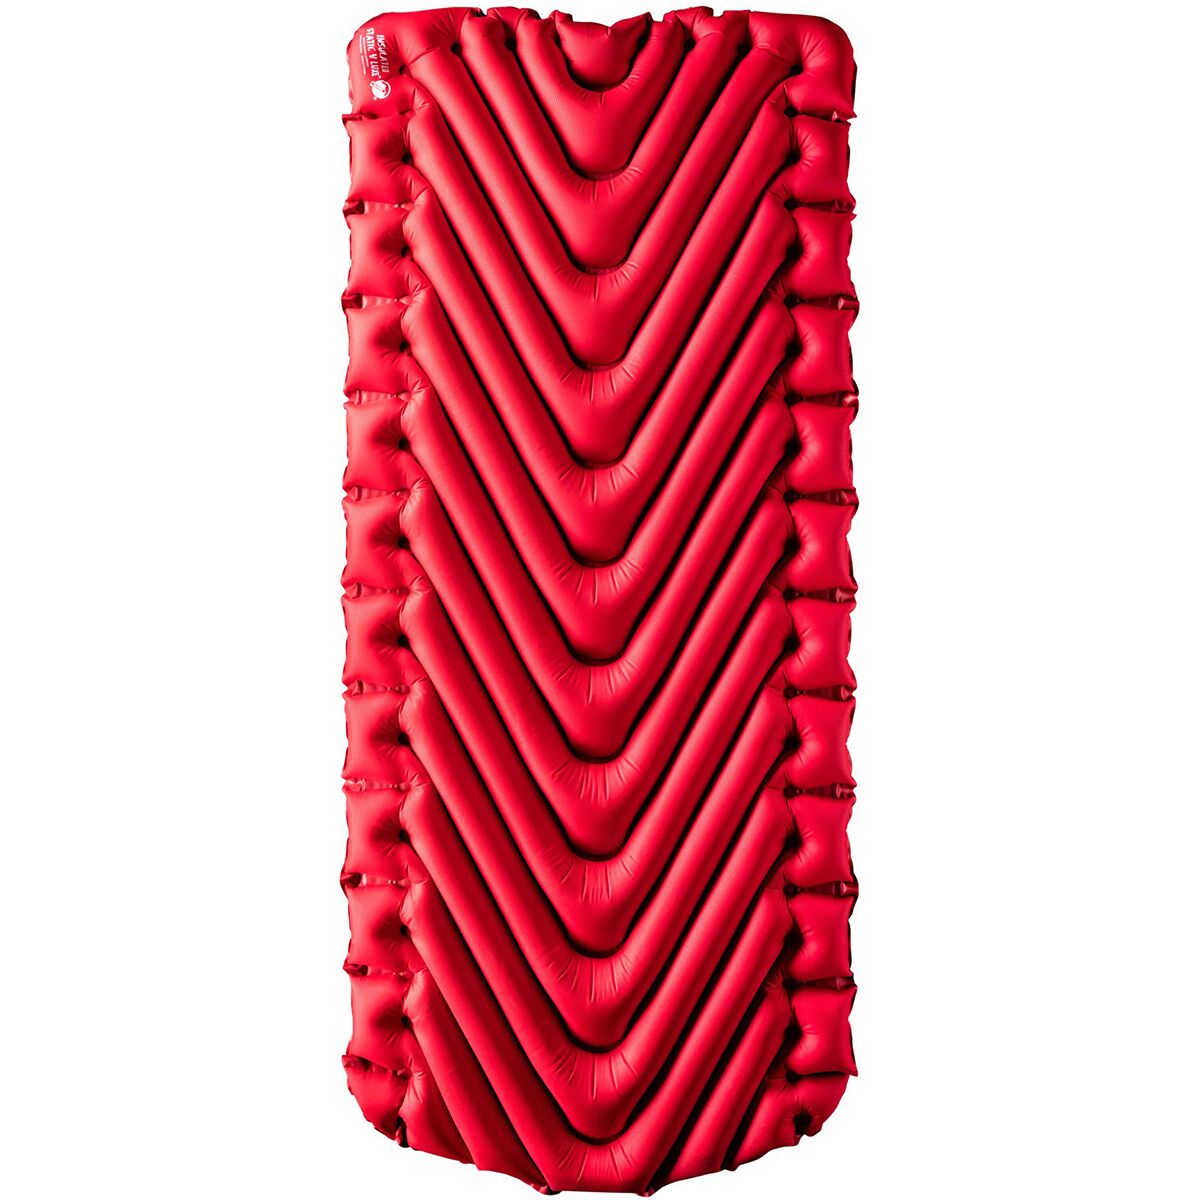 Klymit Insulated Static V Luxe Sleeping Pad